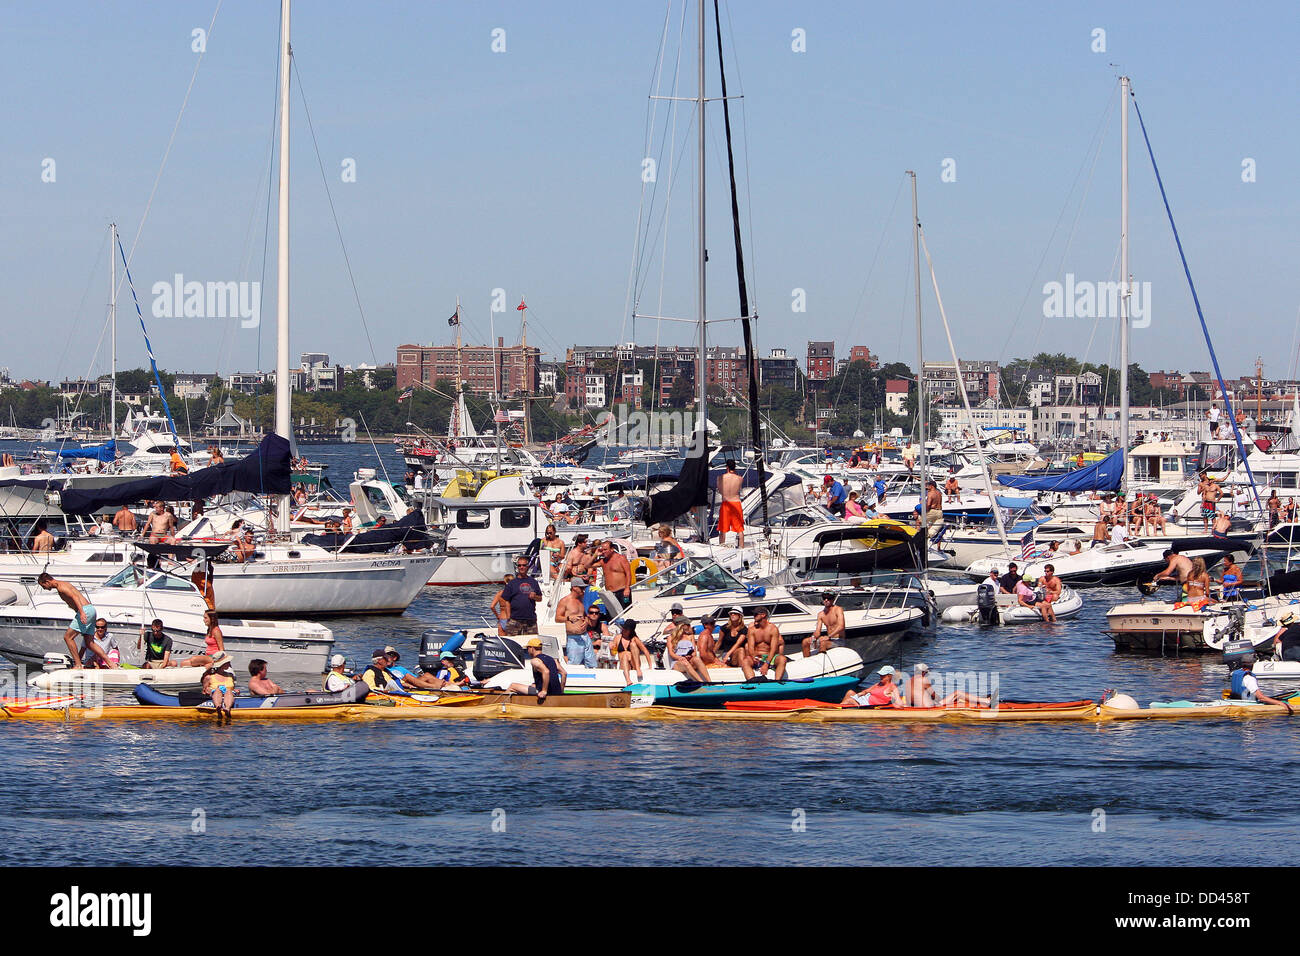 Boston, Massachusetts, USA. 25th Aug, 2013. Spectators watch the Red Bull Cliff Diving World Series at the Institute of Contemporary Art building in Boston, Massachusetts. Anthony Nesmith/CSM/Alamy Live News Stock Photo